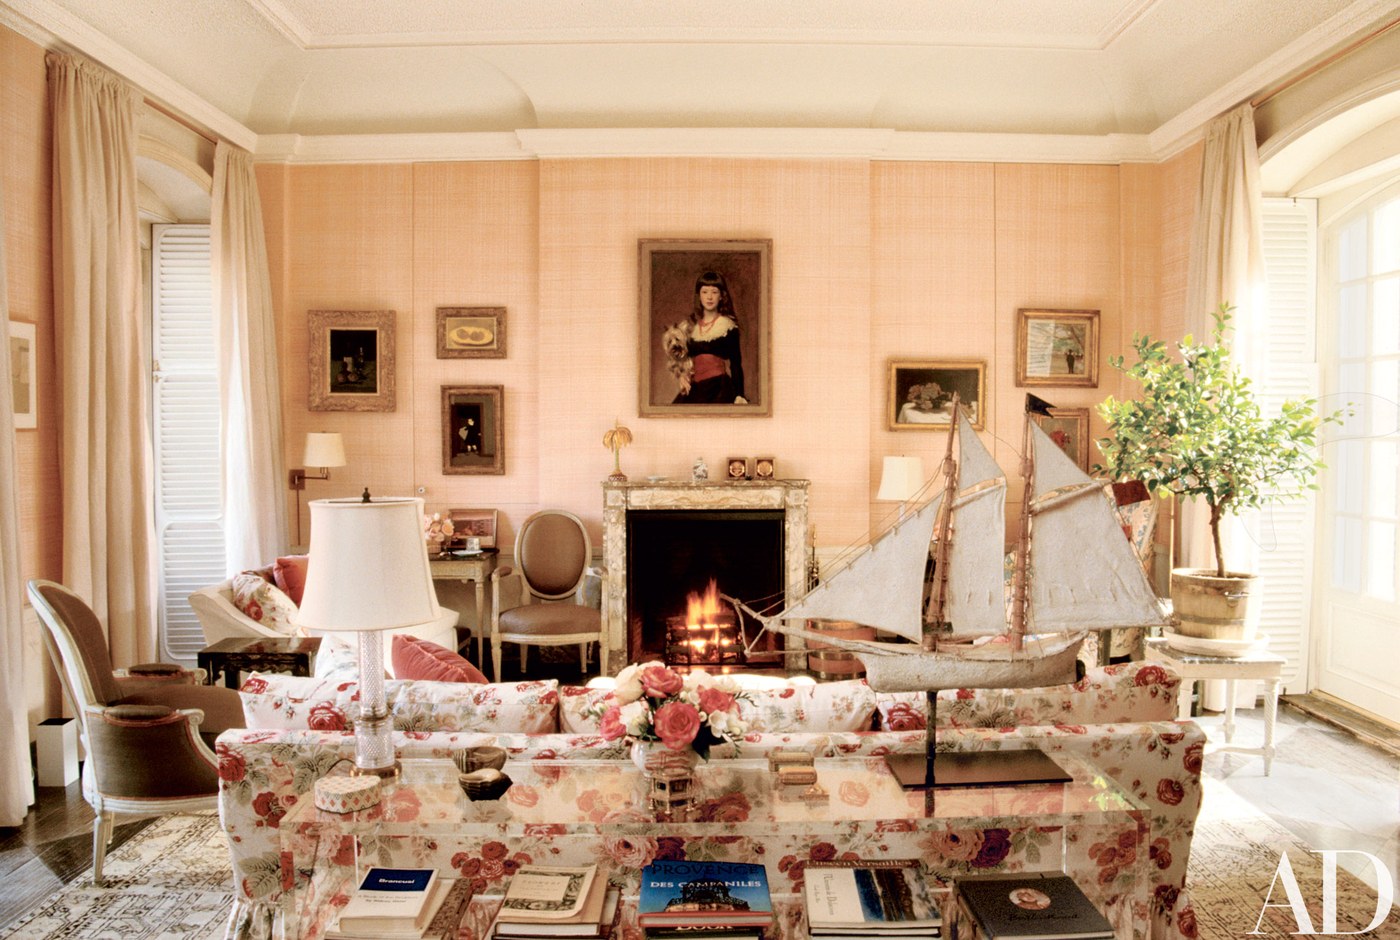 The pink living room of American heiress and art collector Bunny Mellon's Manhattan residence gets us every time, no matter how many times we've seen it. The designer's entire Manhattan home is a perfectly medley of chintz and good taste, latticewor…